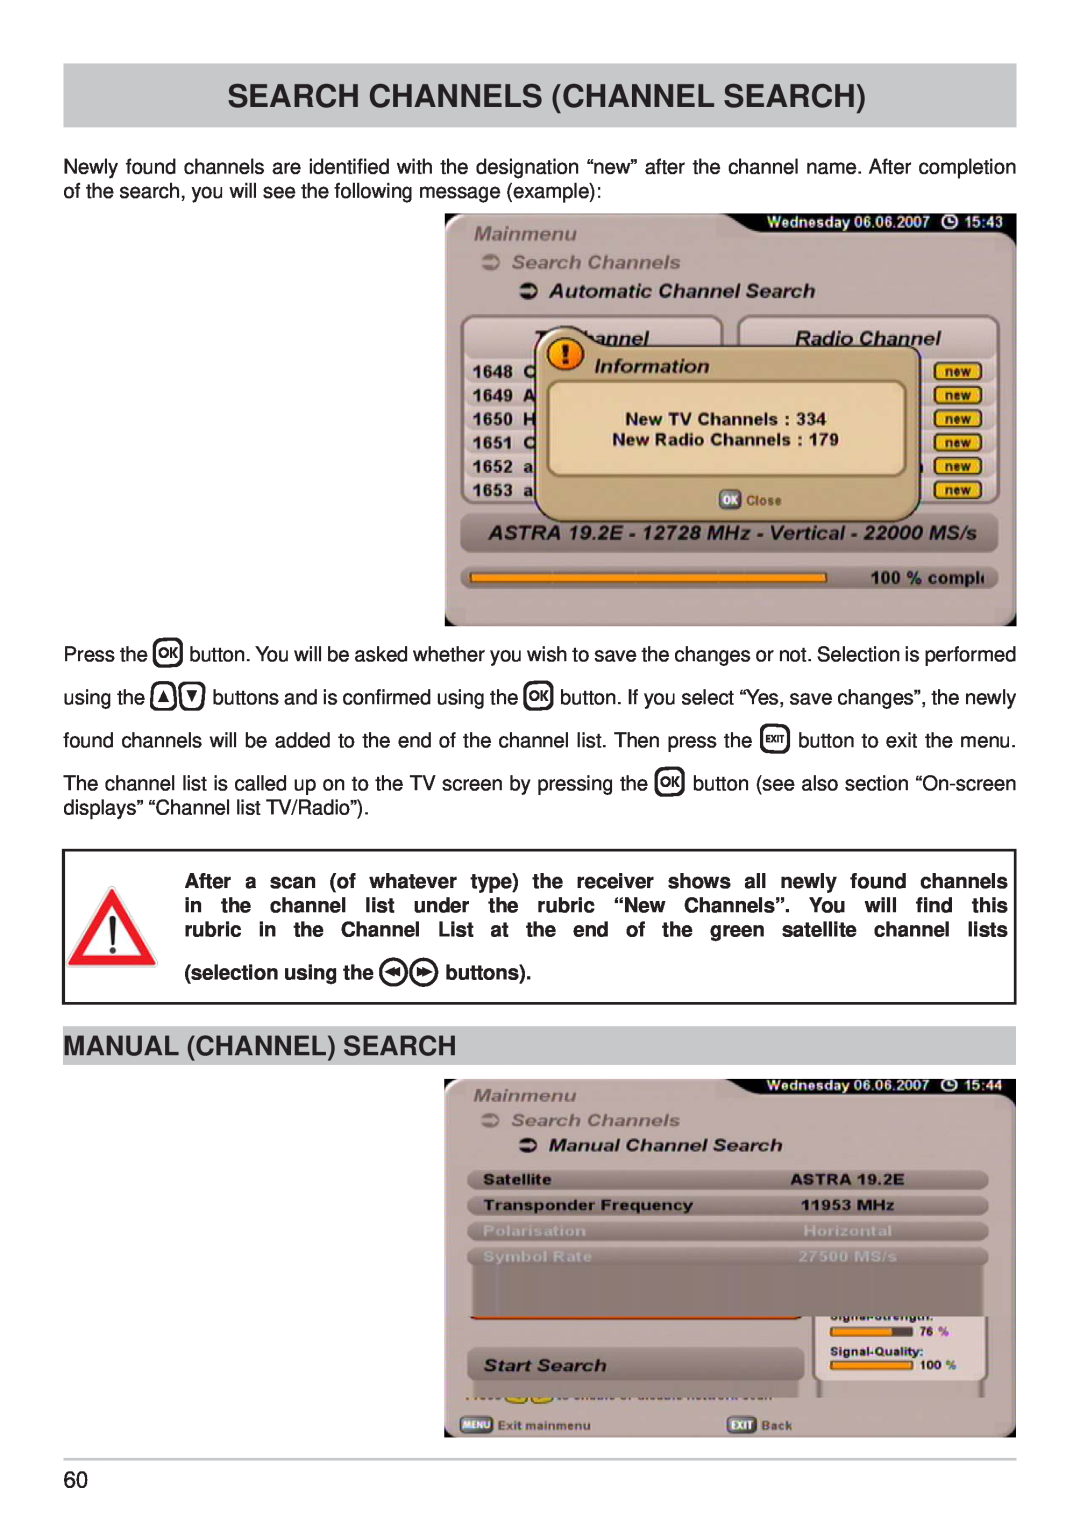 Kathrein UFS 710si Manual Channel Search, Search Channels Channel Search, After, a scan of whatever type, rubric, will ﬁnd 